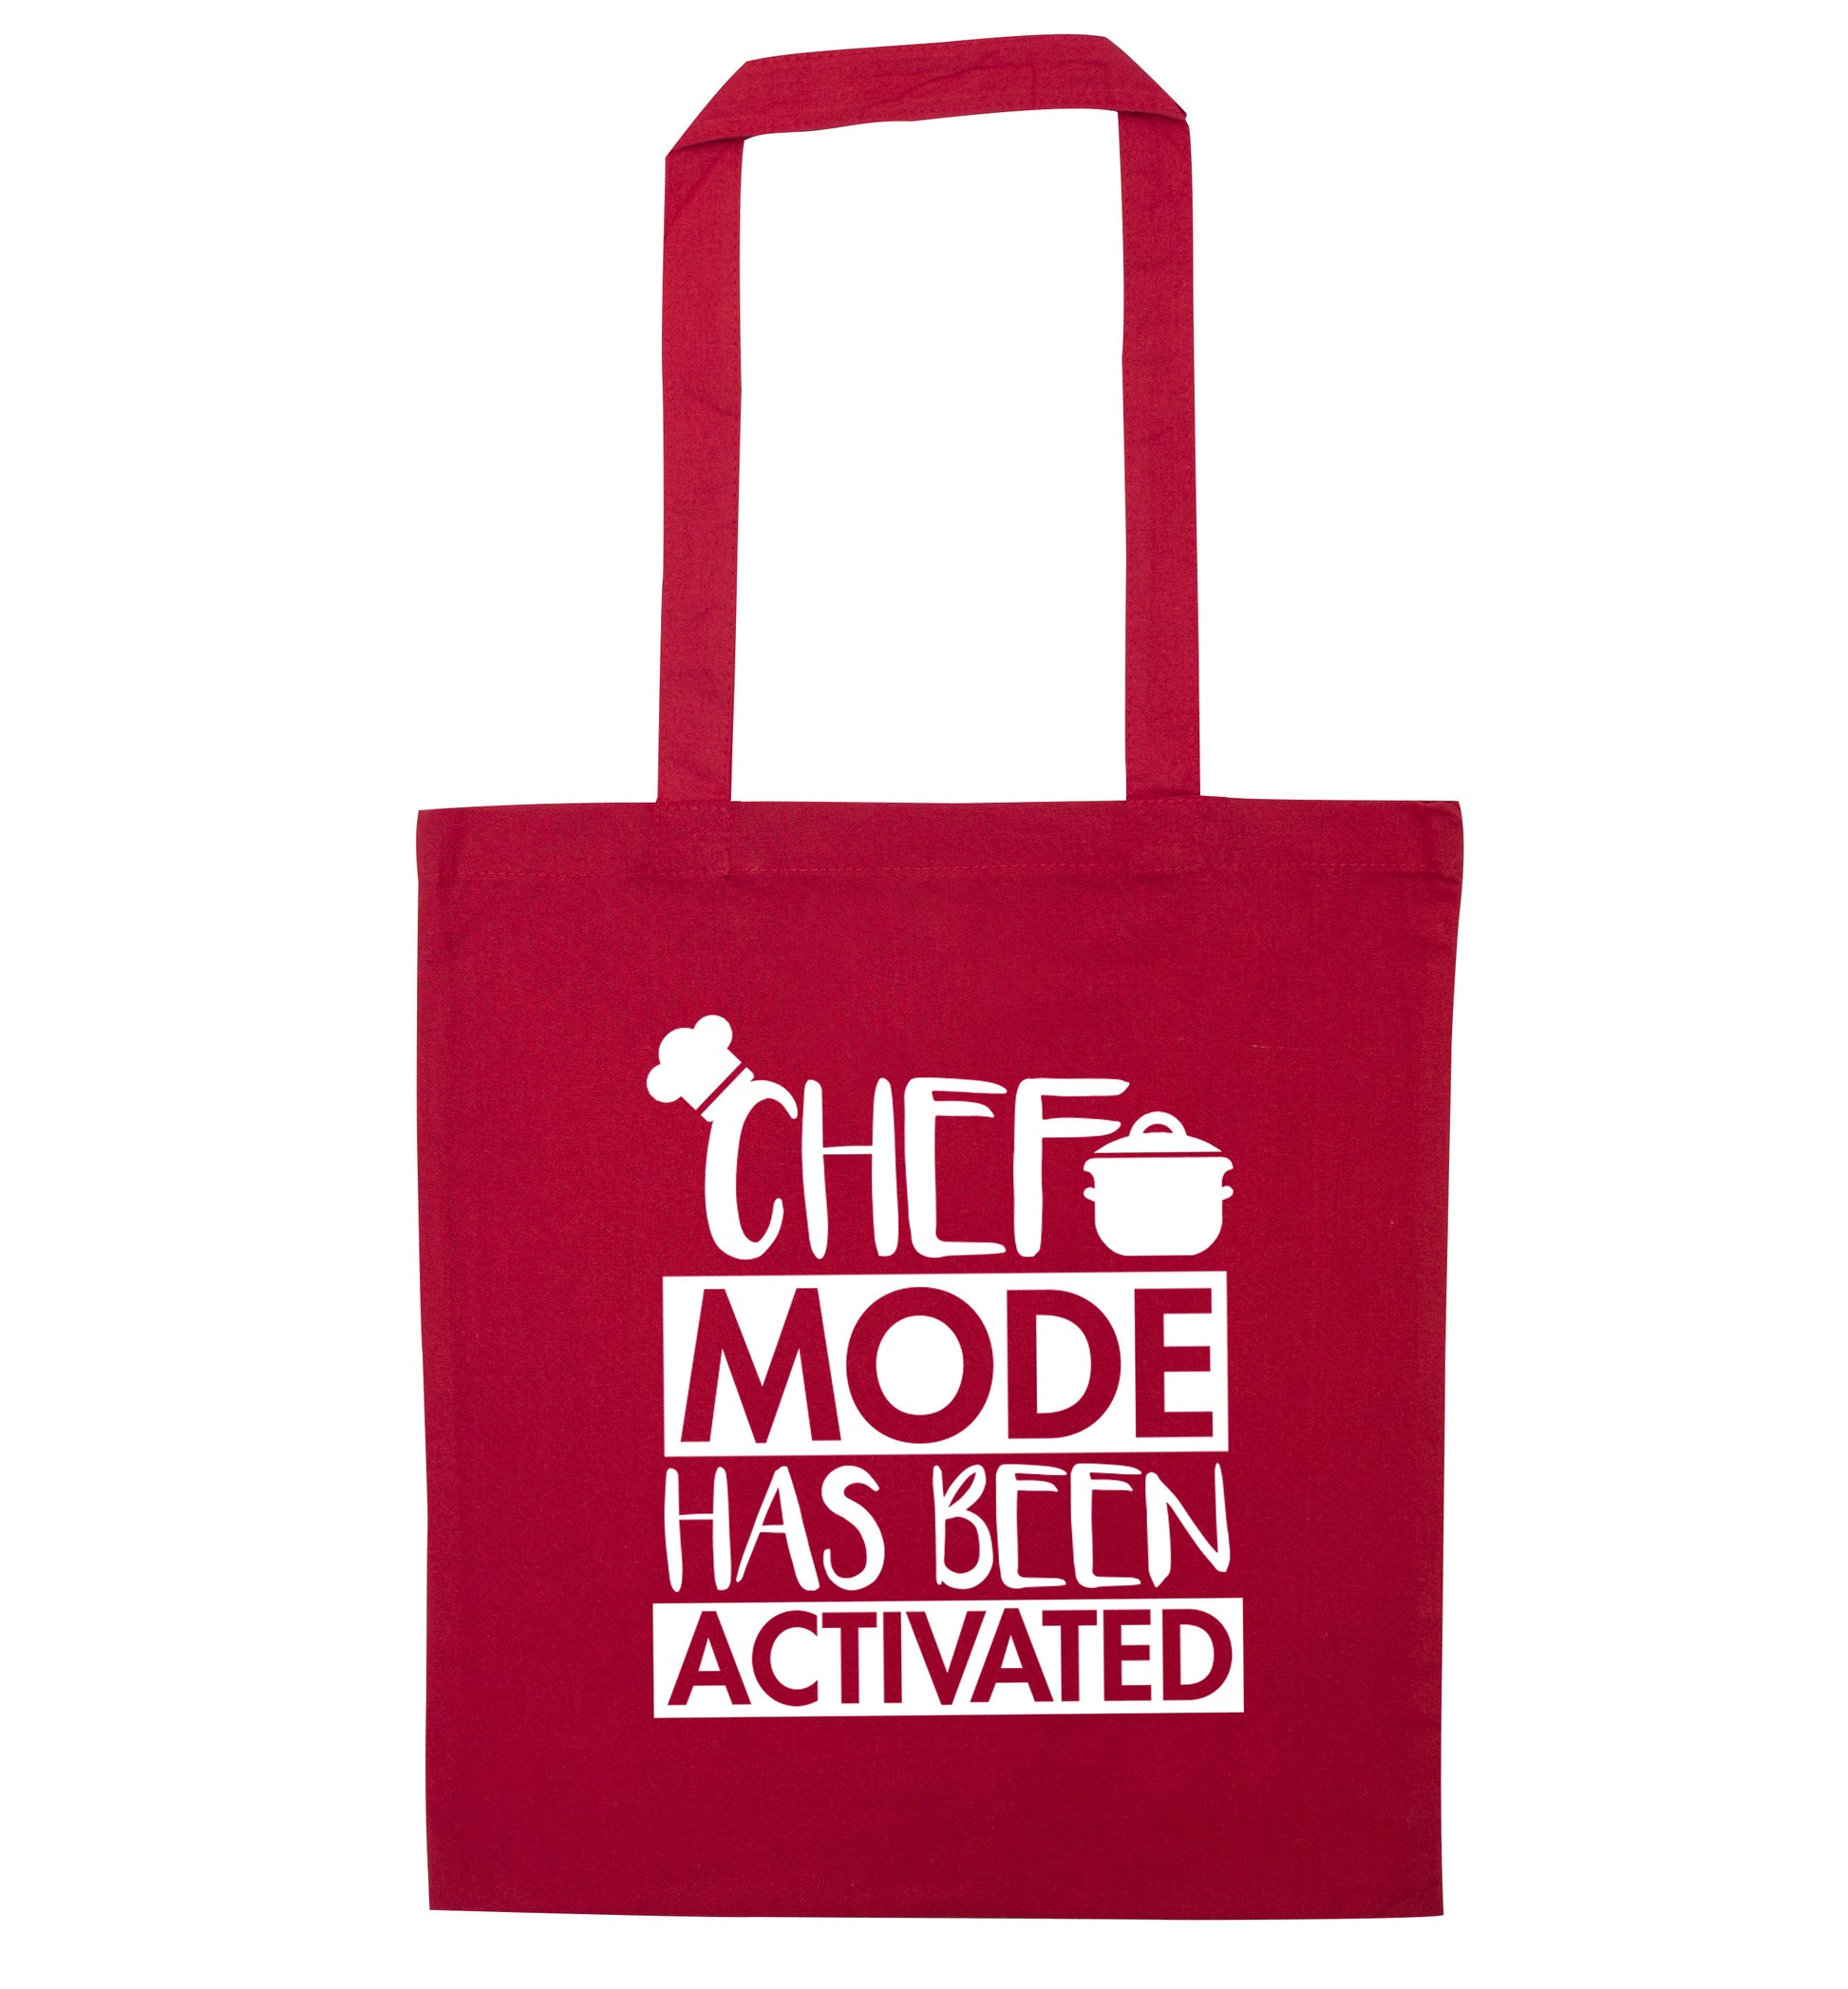 Chef mode has been activated red tote bag